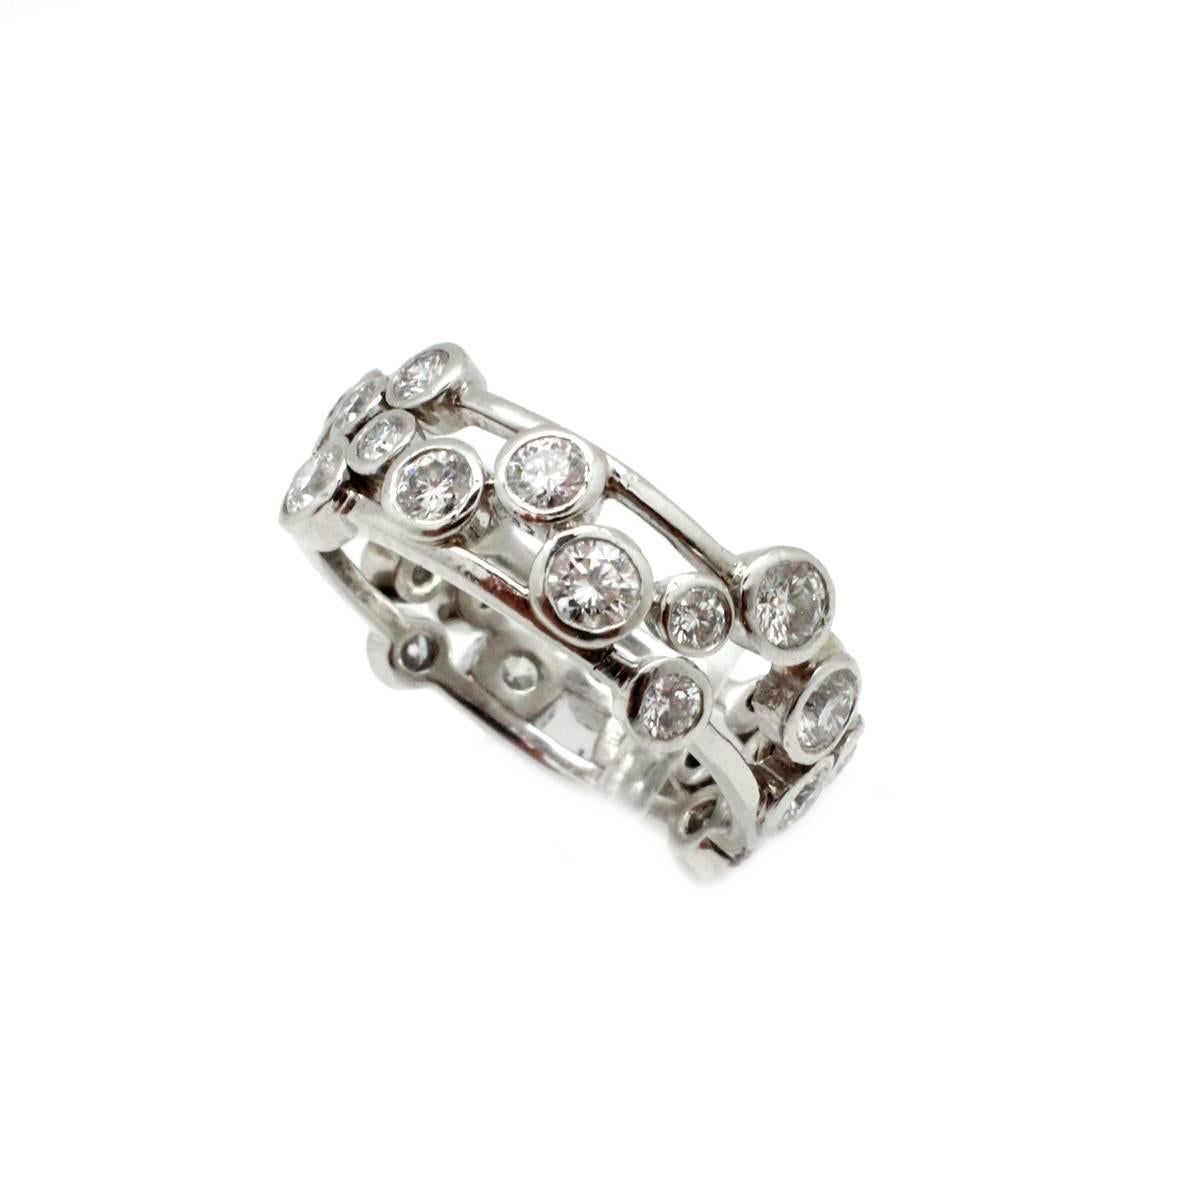 The band style ring is crafted in platinum by designer Tiffany & Co. It features bezel set, round brilliant-cut diamonds all around. The diamonds have a total weight of 1.60ct and are graded G in color and VS in clarity. The ring measures 4.5mm wide